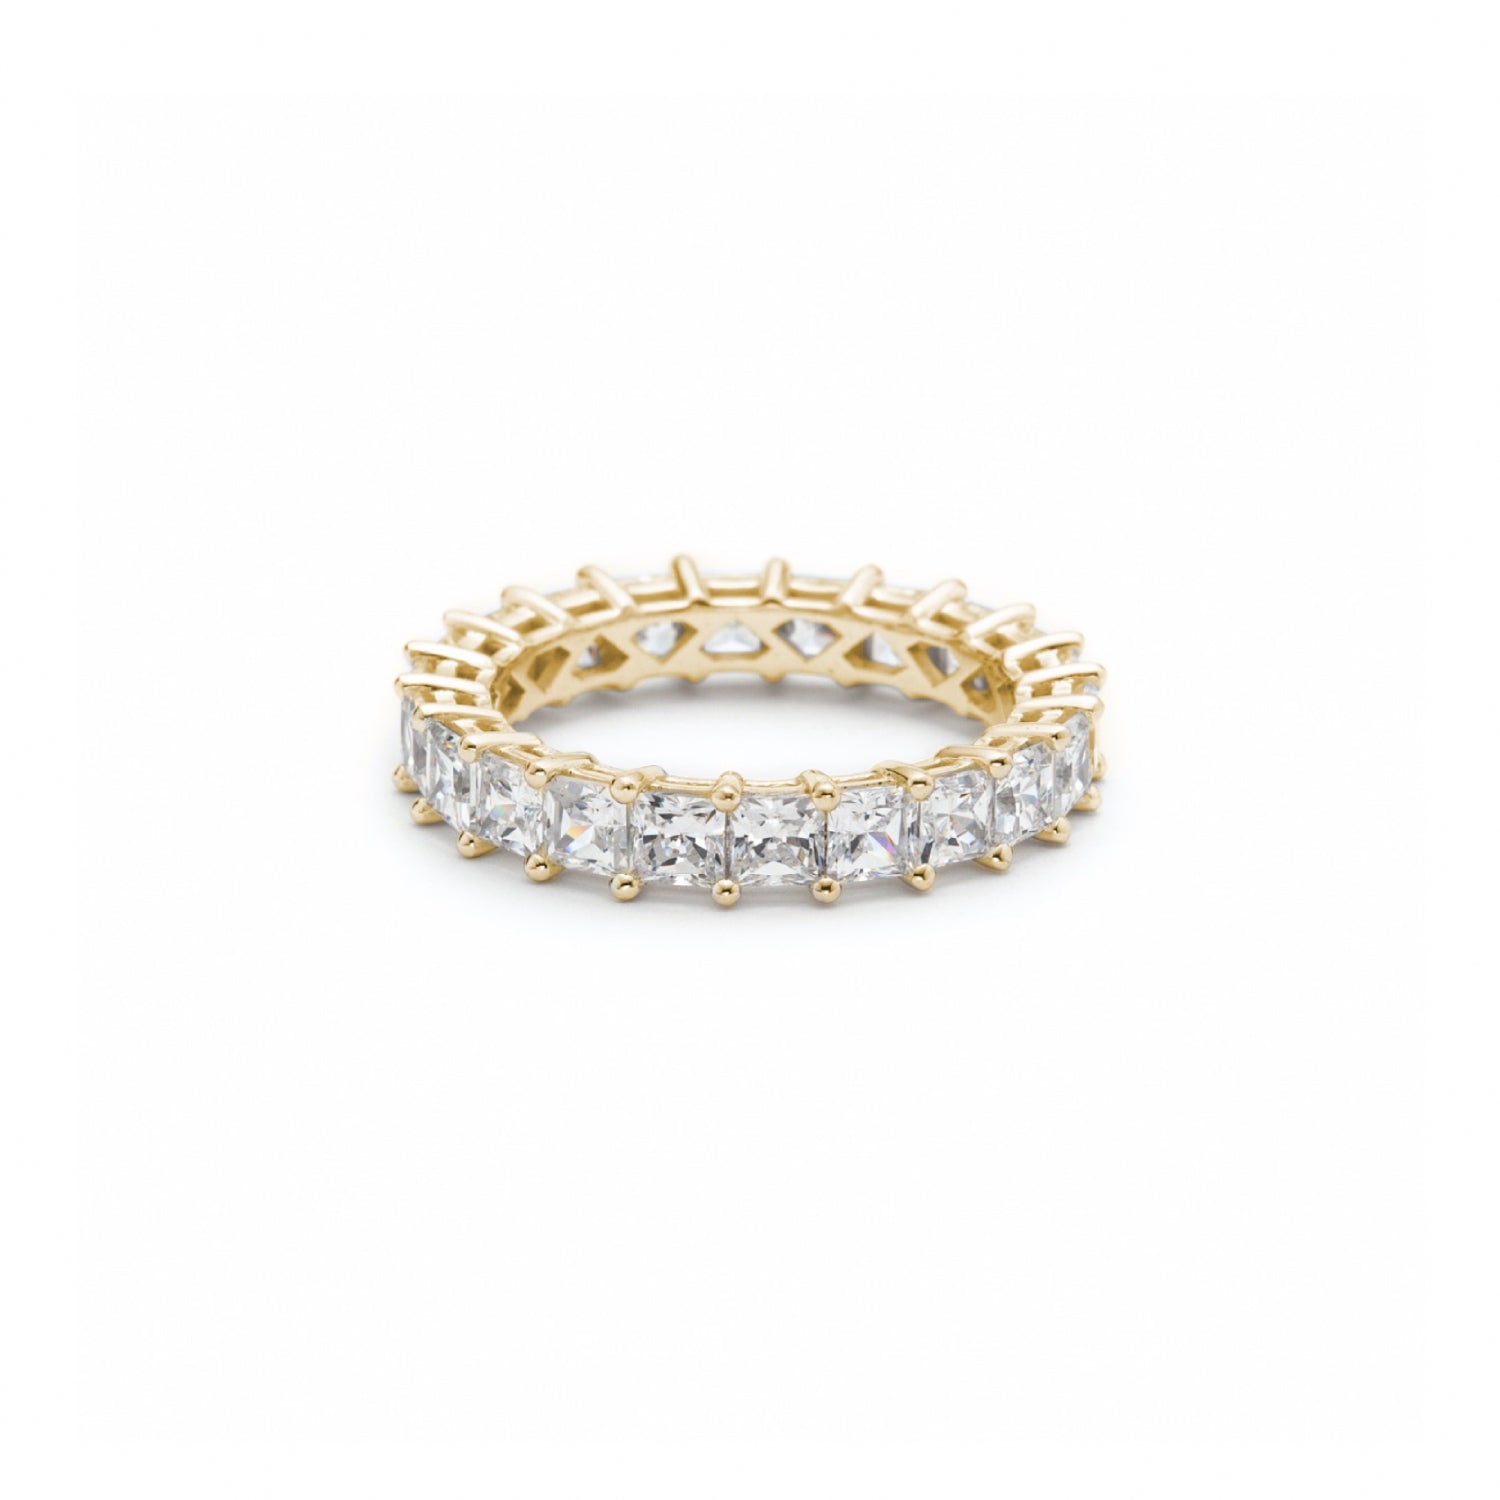 Signature Princess Cut Diamond Shared Prong Eternity Ring in Yellow Gold